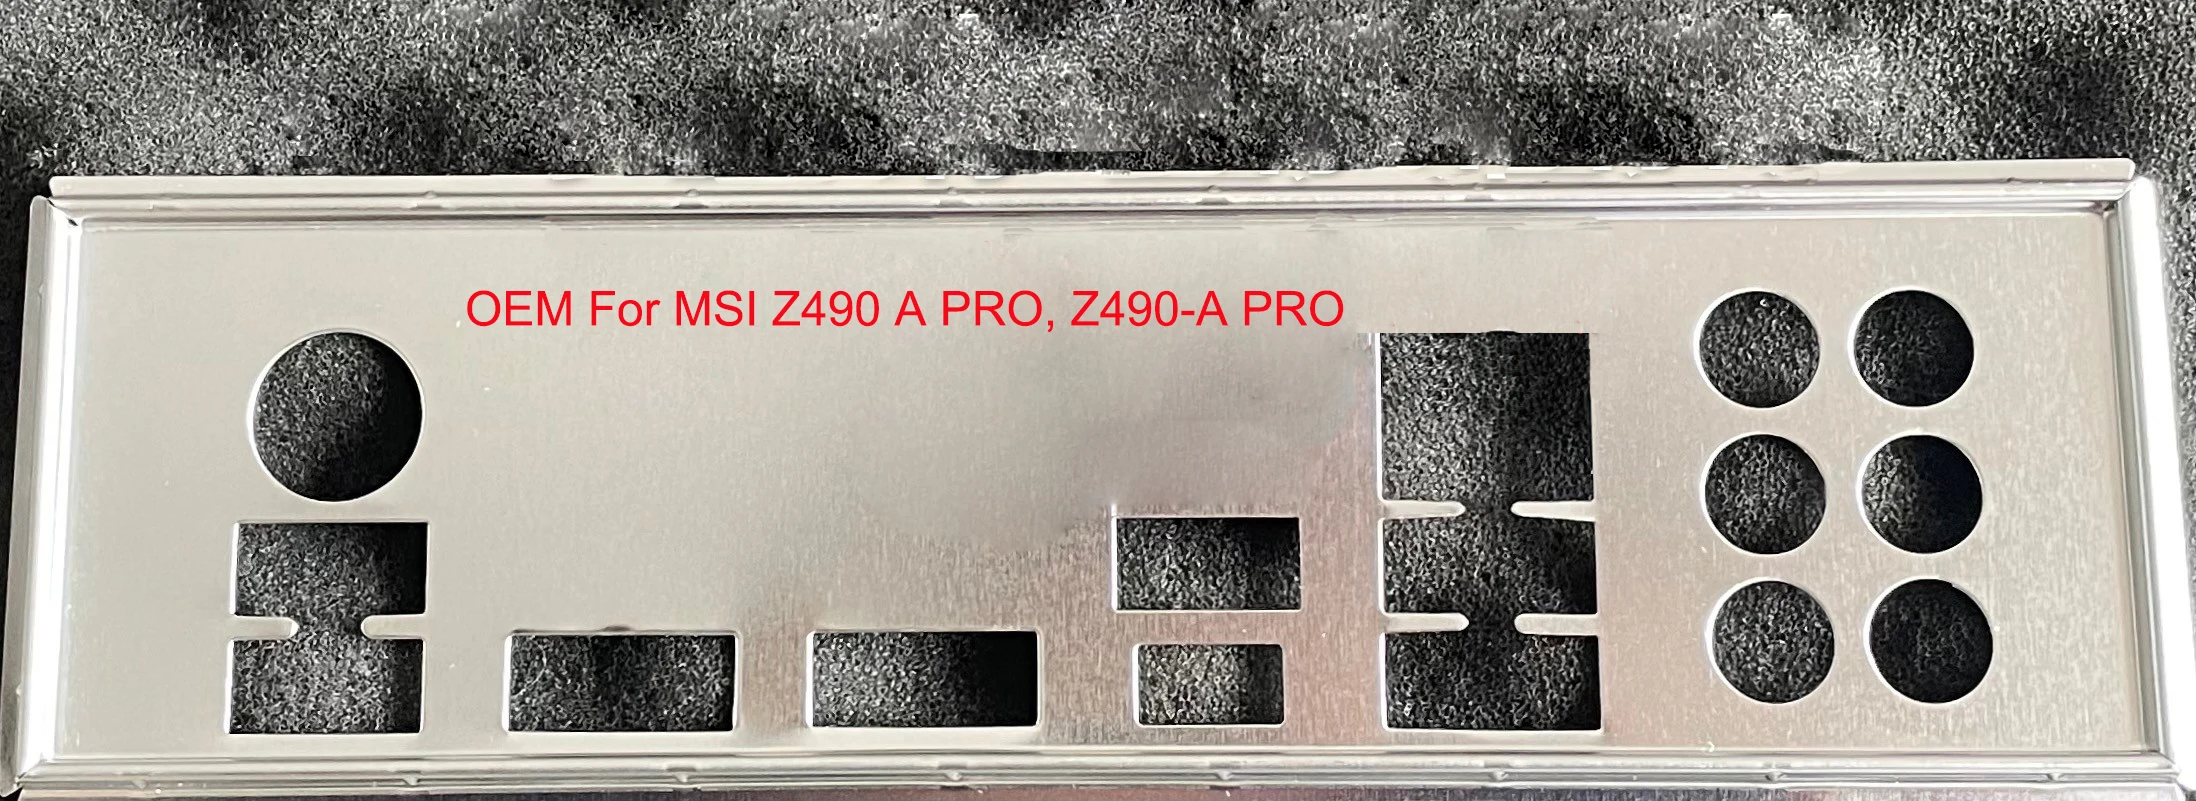 MSI Z490 A PRO I/O Shield Back Plate - Genuine OEM BackPlate Bracket Description Image.This Product Can Be Found With The Tag Names Backplate msi, Backplate z490, Blende bracket, Msi z490 pro, Msi z490 pro review